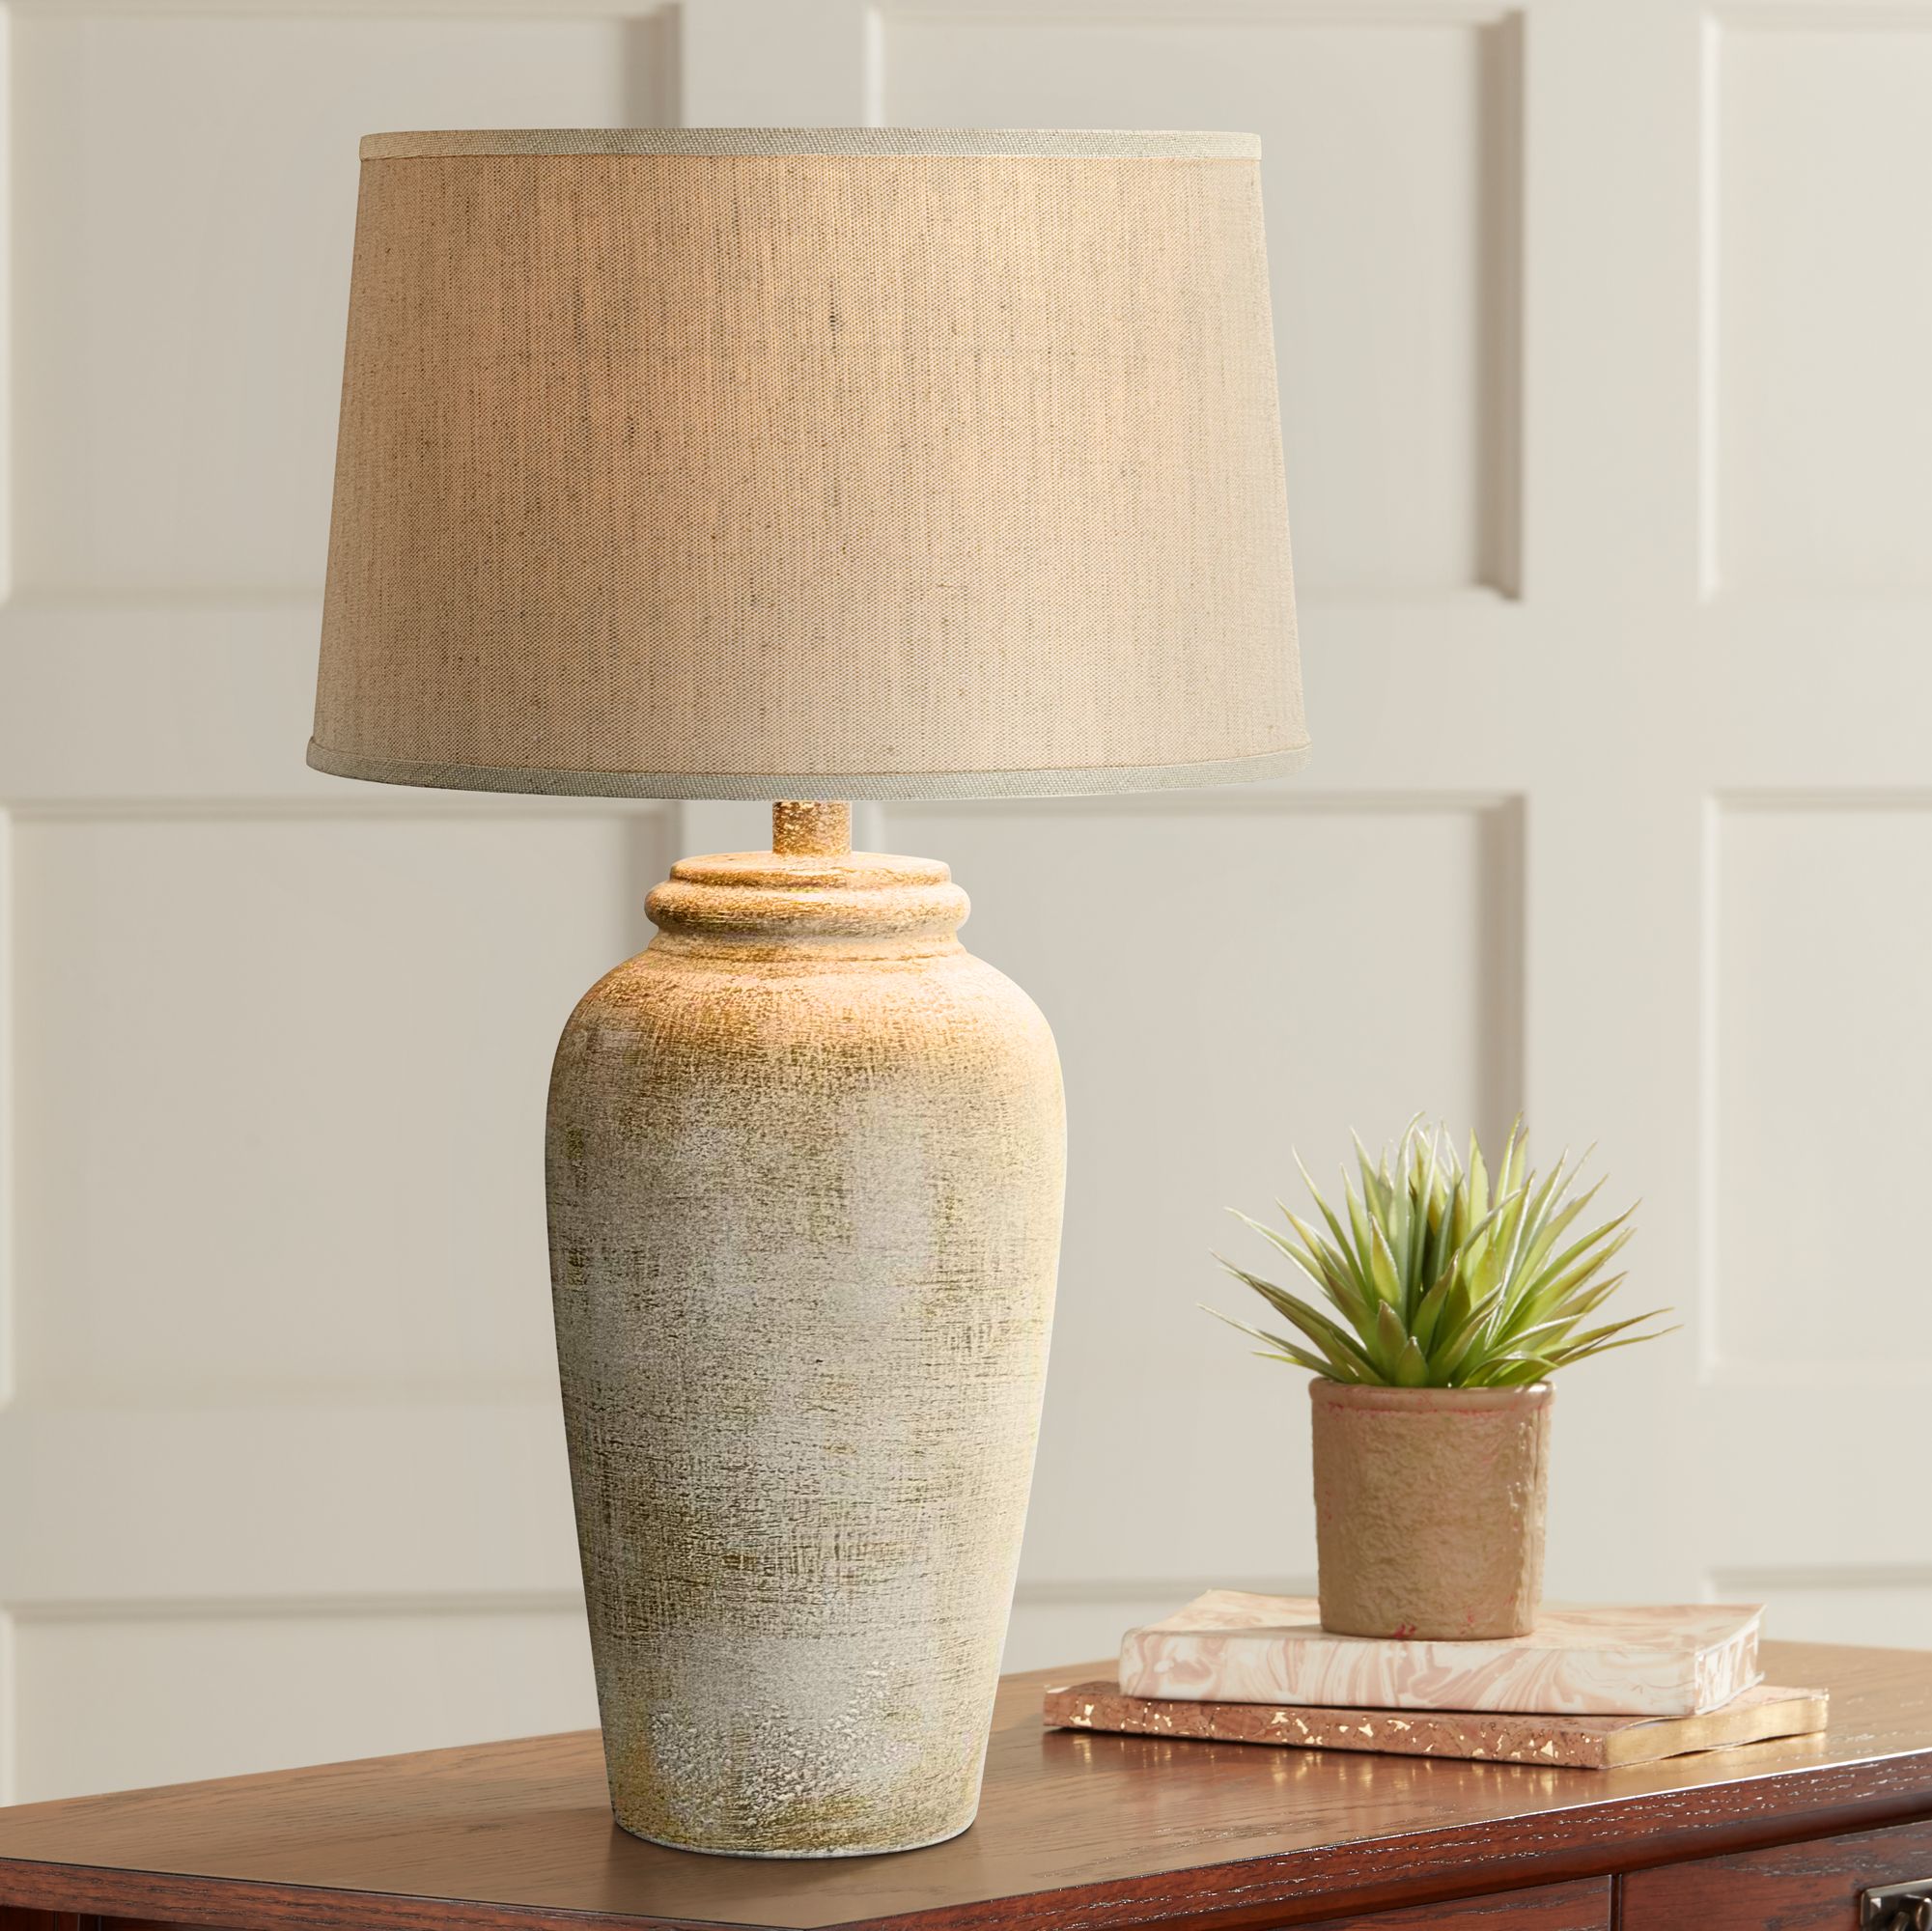 Lechee Sand Stone Table Lamp - #13C10 